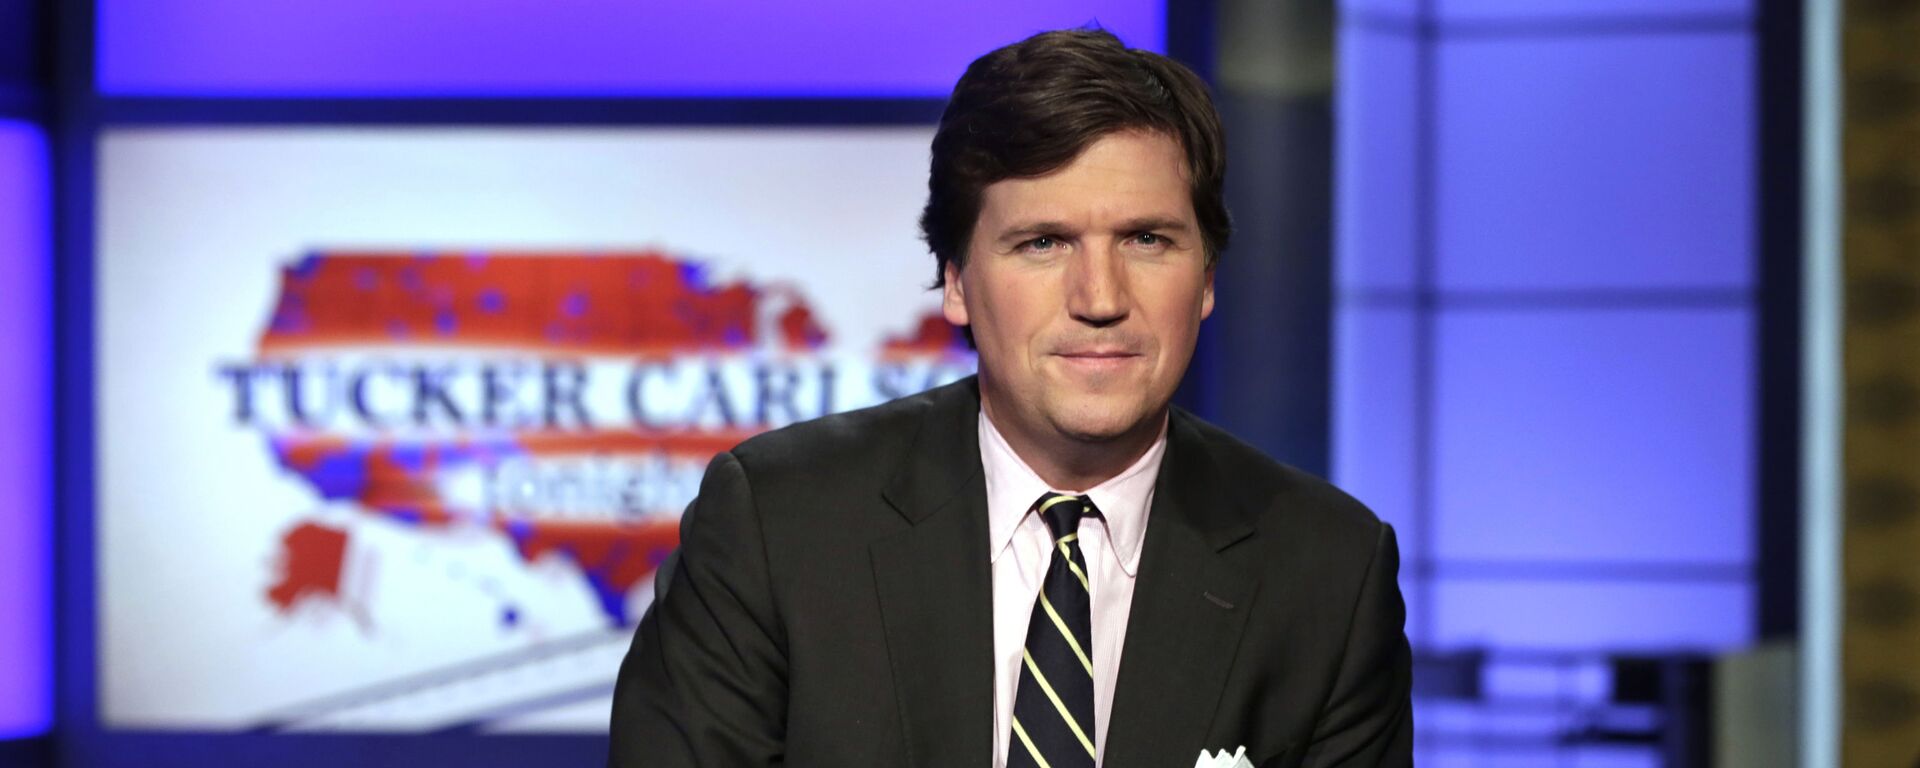 FILE - In this March 2, 2017 file photo, Tucker Carlson, host of Tucker Carlson Tonight, poses for photos in a Fox News Channel studio, in New York. Carlson, who on Monday's show addressed the story of his former top writer, Blake Neff, who resigned after CNN found he had written a series of controversial tweets under a pseudonym, has left for vacation. It fits a pattern at Fox, whose personalities tend to go away to cool off when the heat is on. Carlson's vacation is the sixth example in a little more than three years. A Fox representative confirmed Carlson's vacation was planned before the Neff story broke. (AP Photo/Richard Drew, File) - Sputnik International, 1920, 24.04.2023